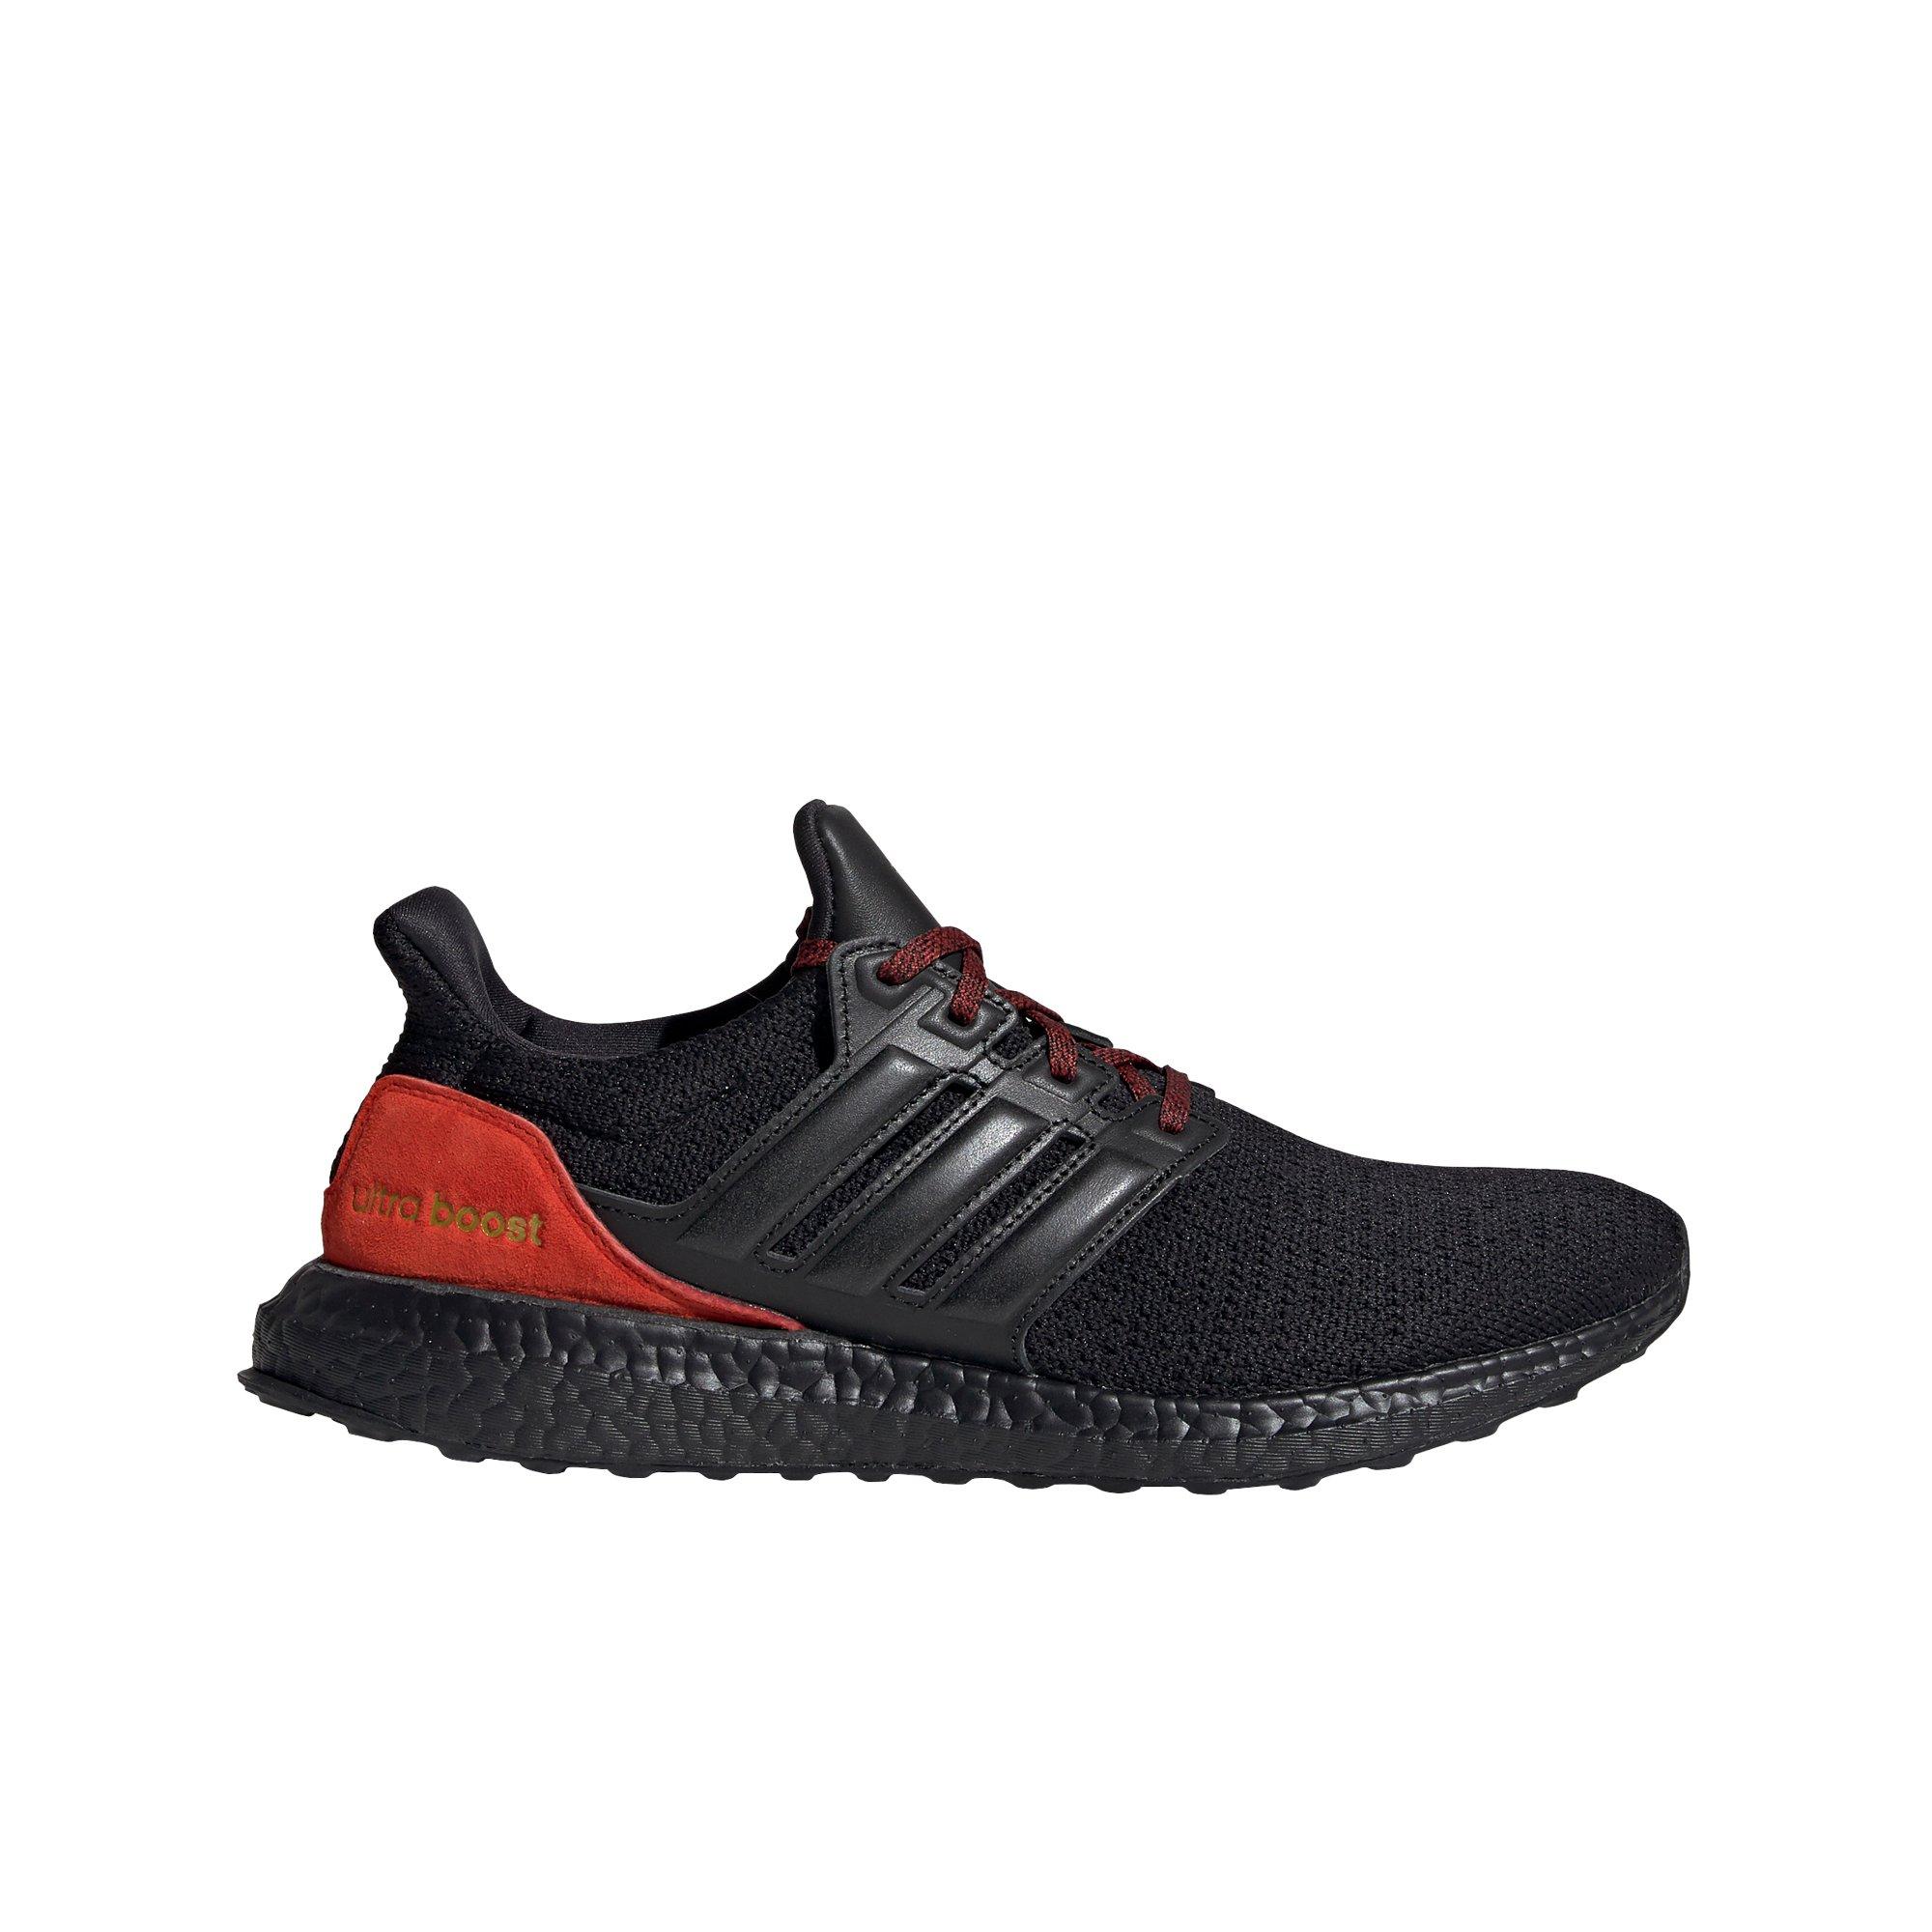 adidas black and red running shoes